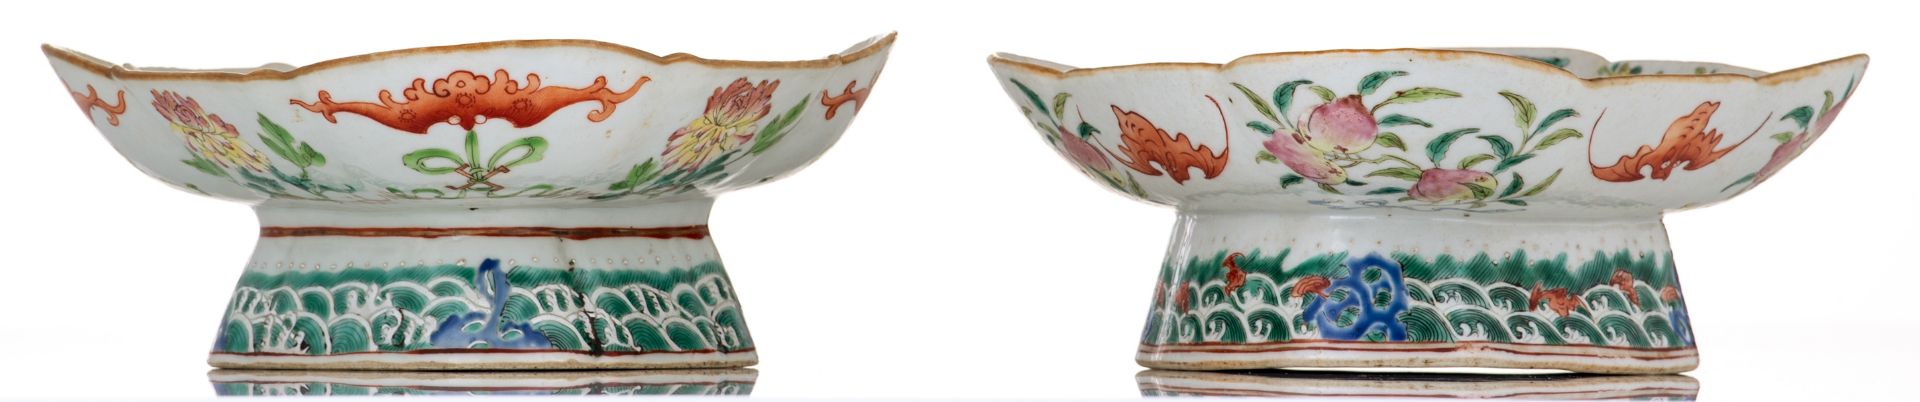 Two Chinese famille rose and polychrome footed plates, decorated with flowers, bats and auspicious s - Image 5 of 9